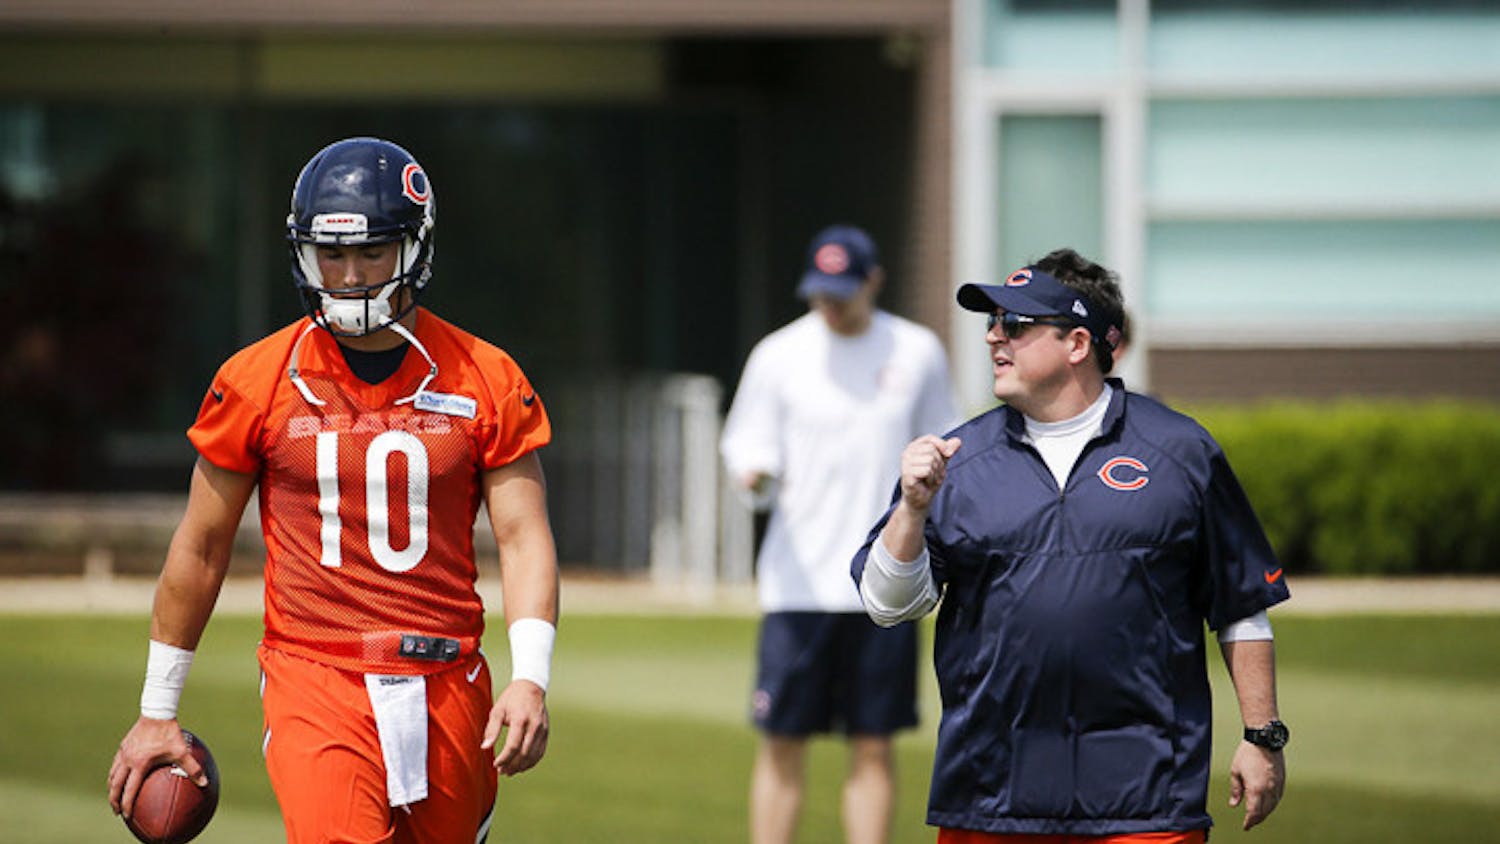 Quarterback Mitch Trubisky walks with Bears offensive coordinator Dowell Loggains at rookie minicamp at Halas Hall on May 12, 2017. Loggains will reportedly be South Carolina's next offensive coordinator.